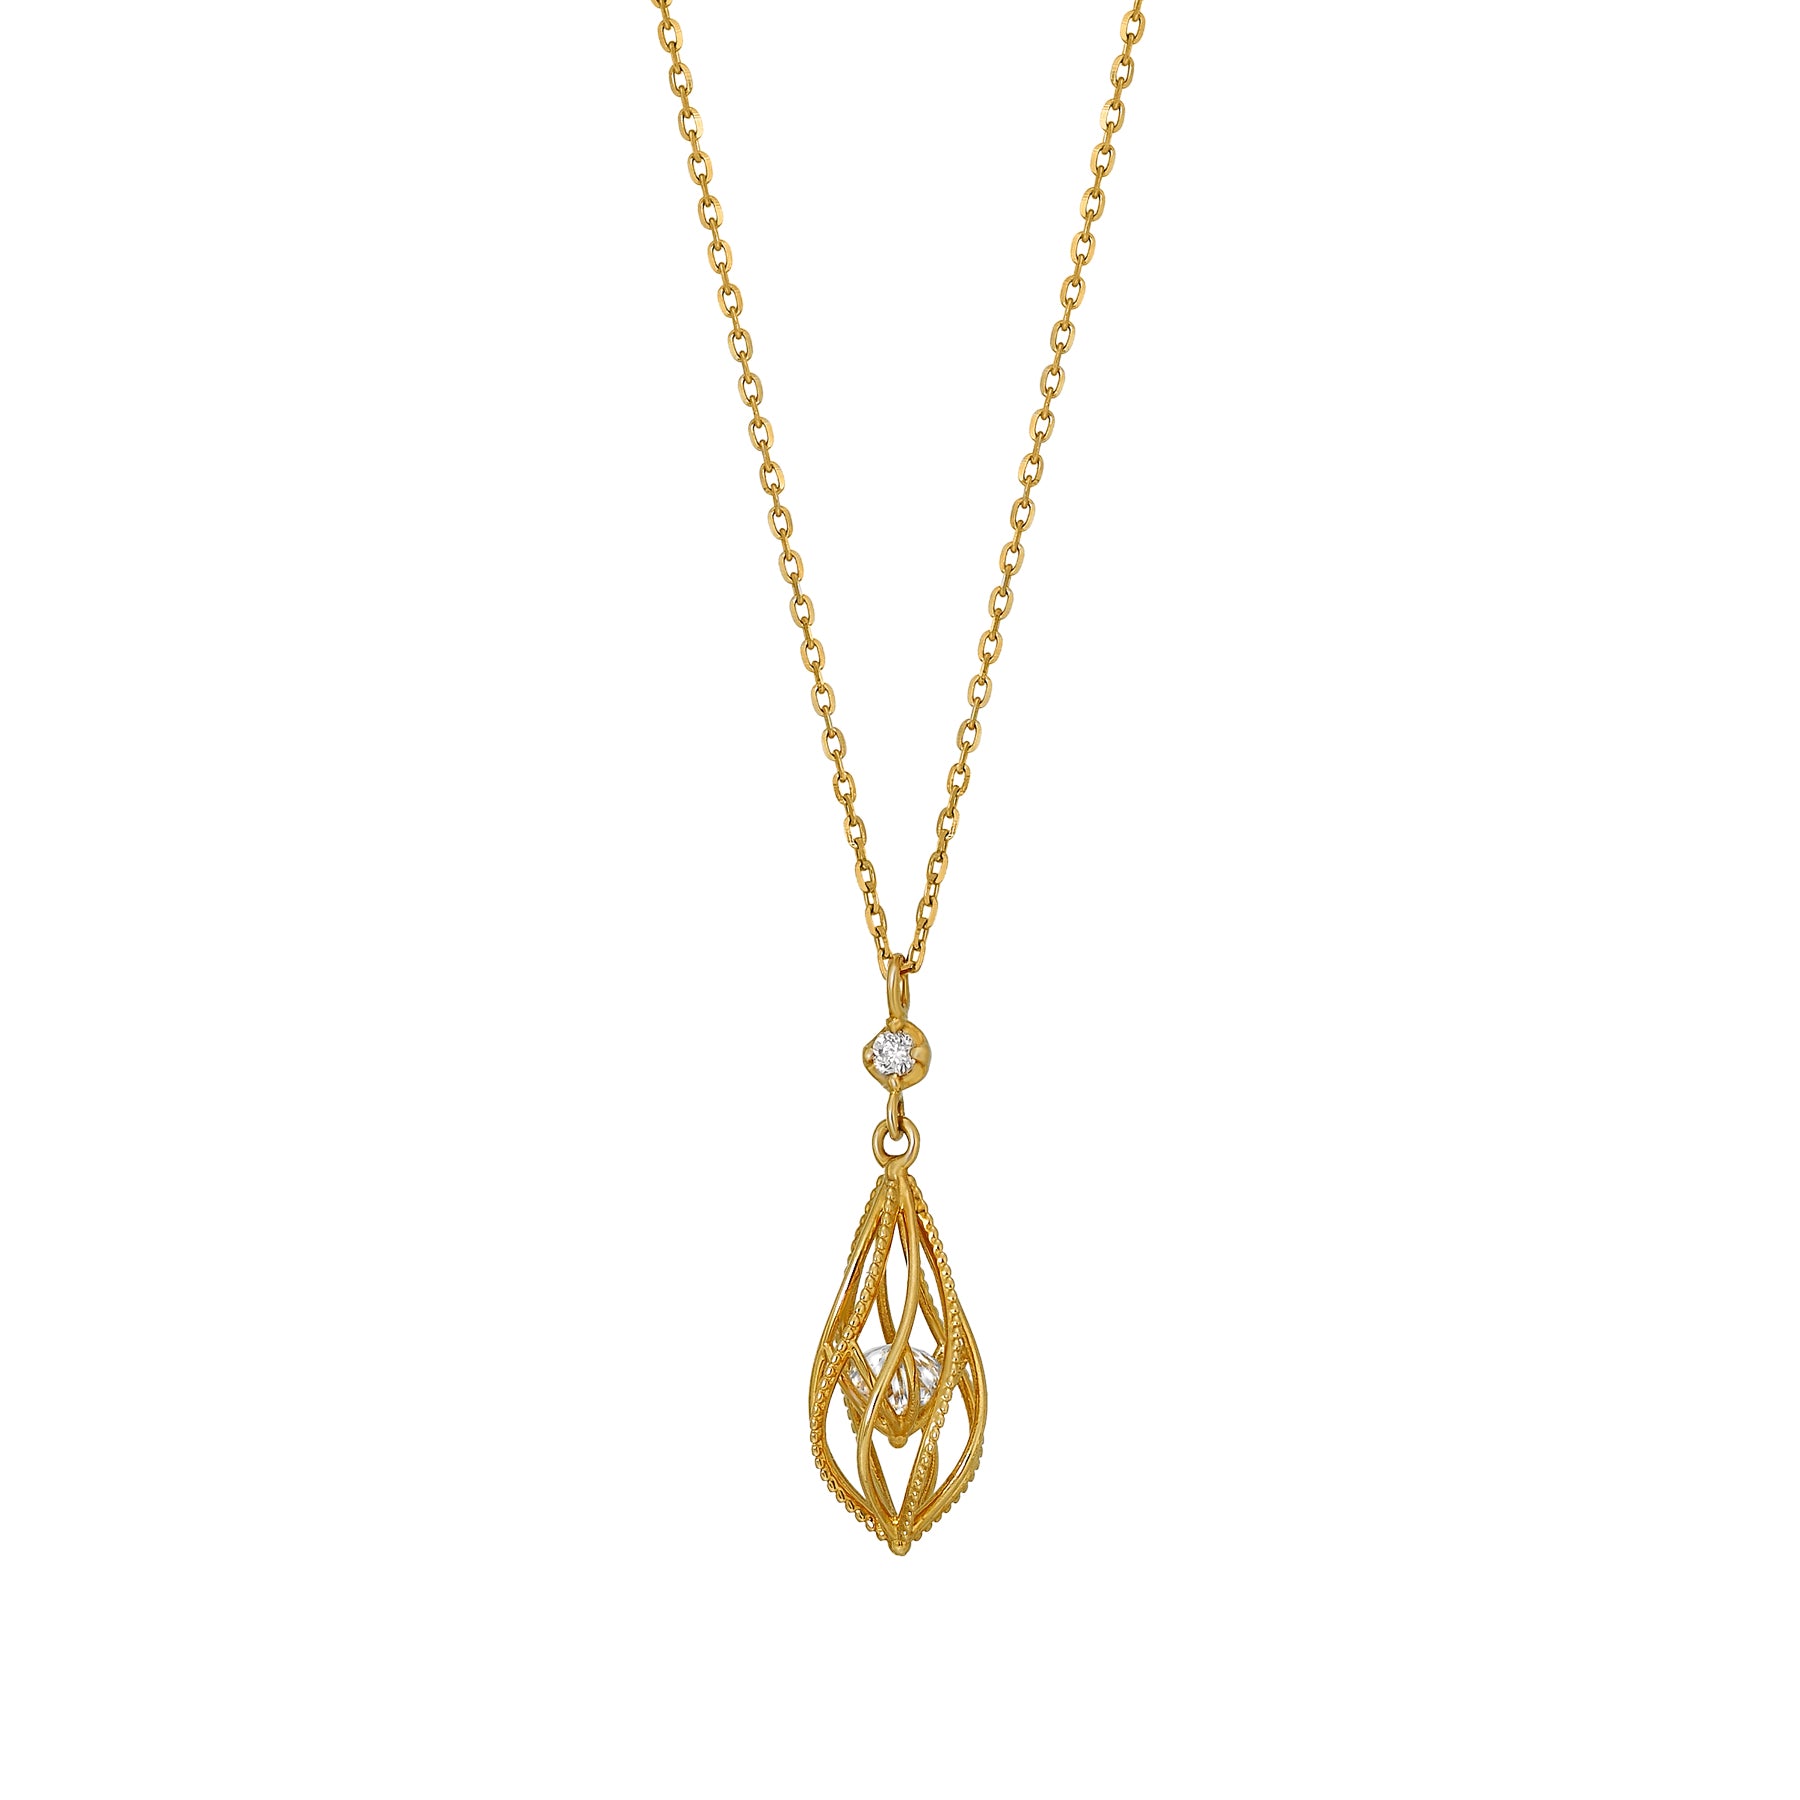 [Pannier] 18K Yellow Gold Floating Cubic Zirconia Necklace - Product Image